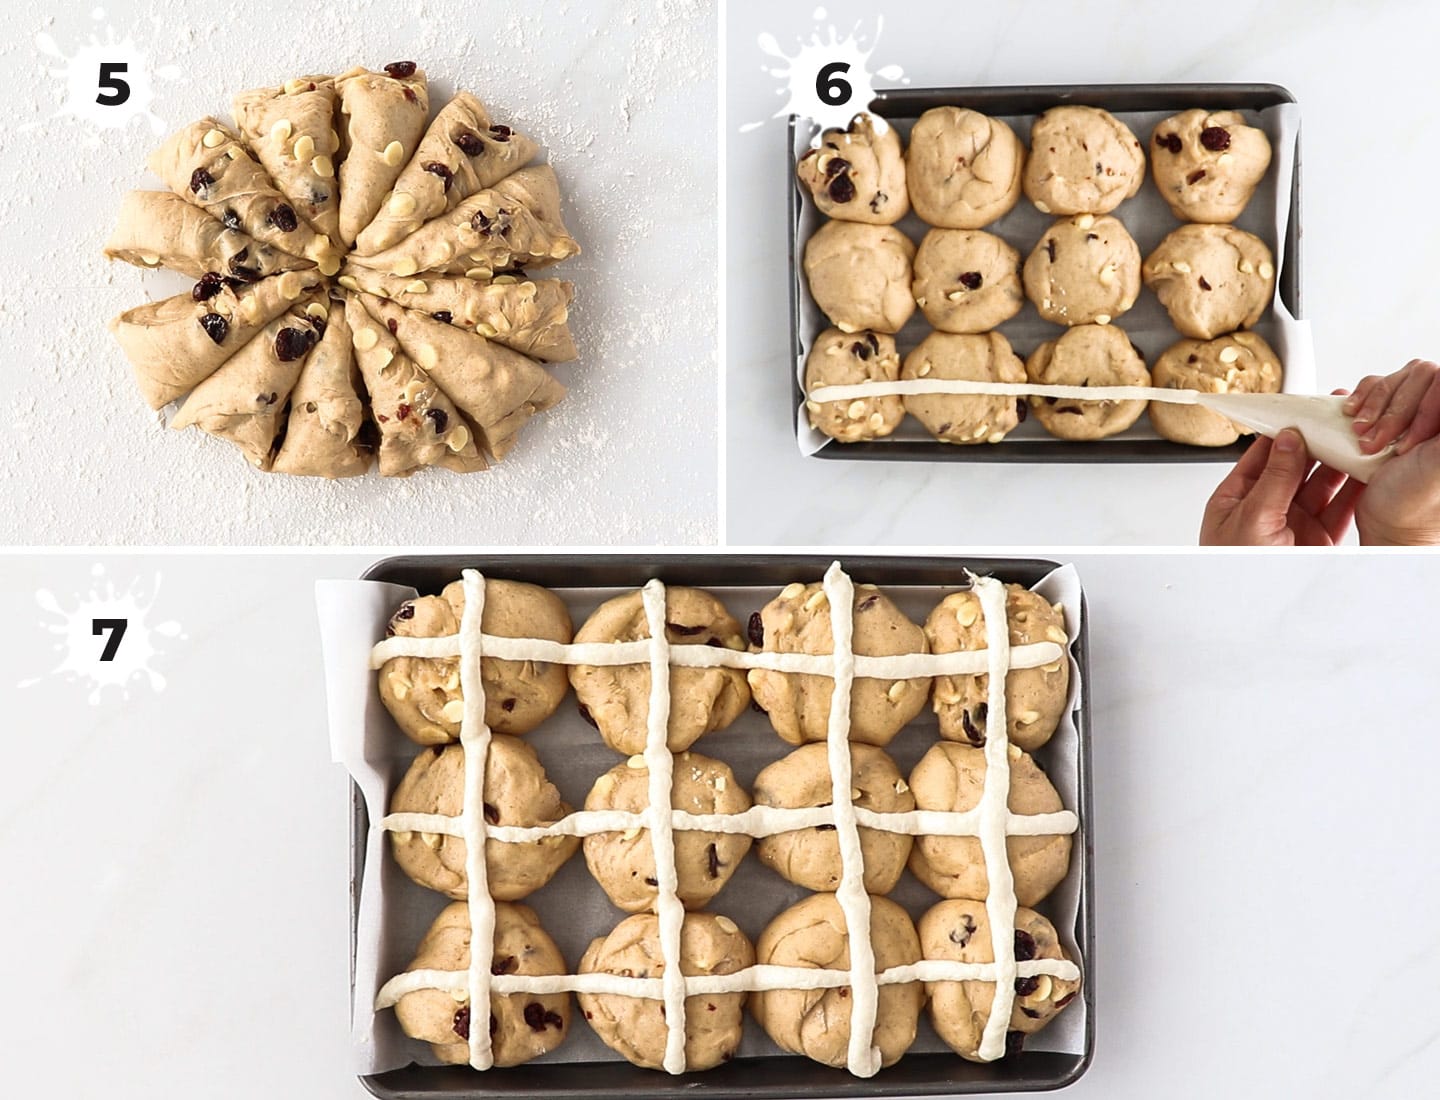 A collage of 3 images showing how to shape the hot cross buns.